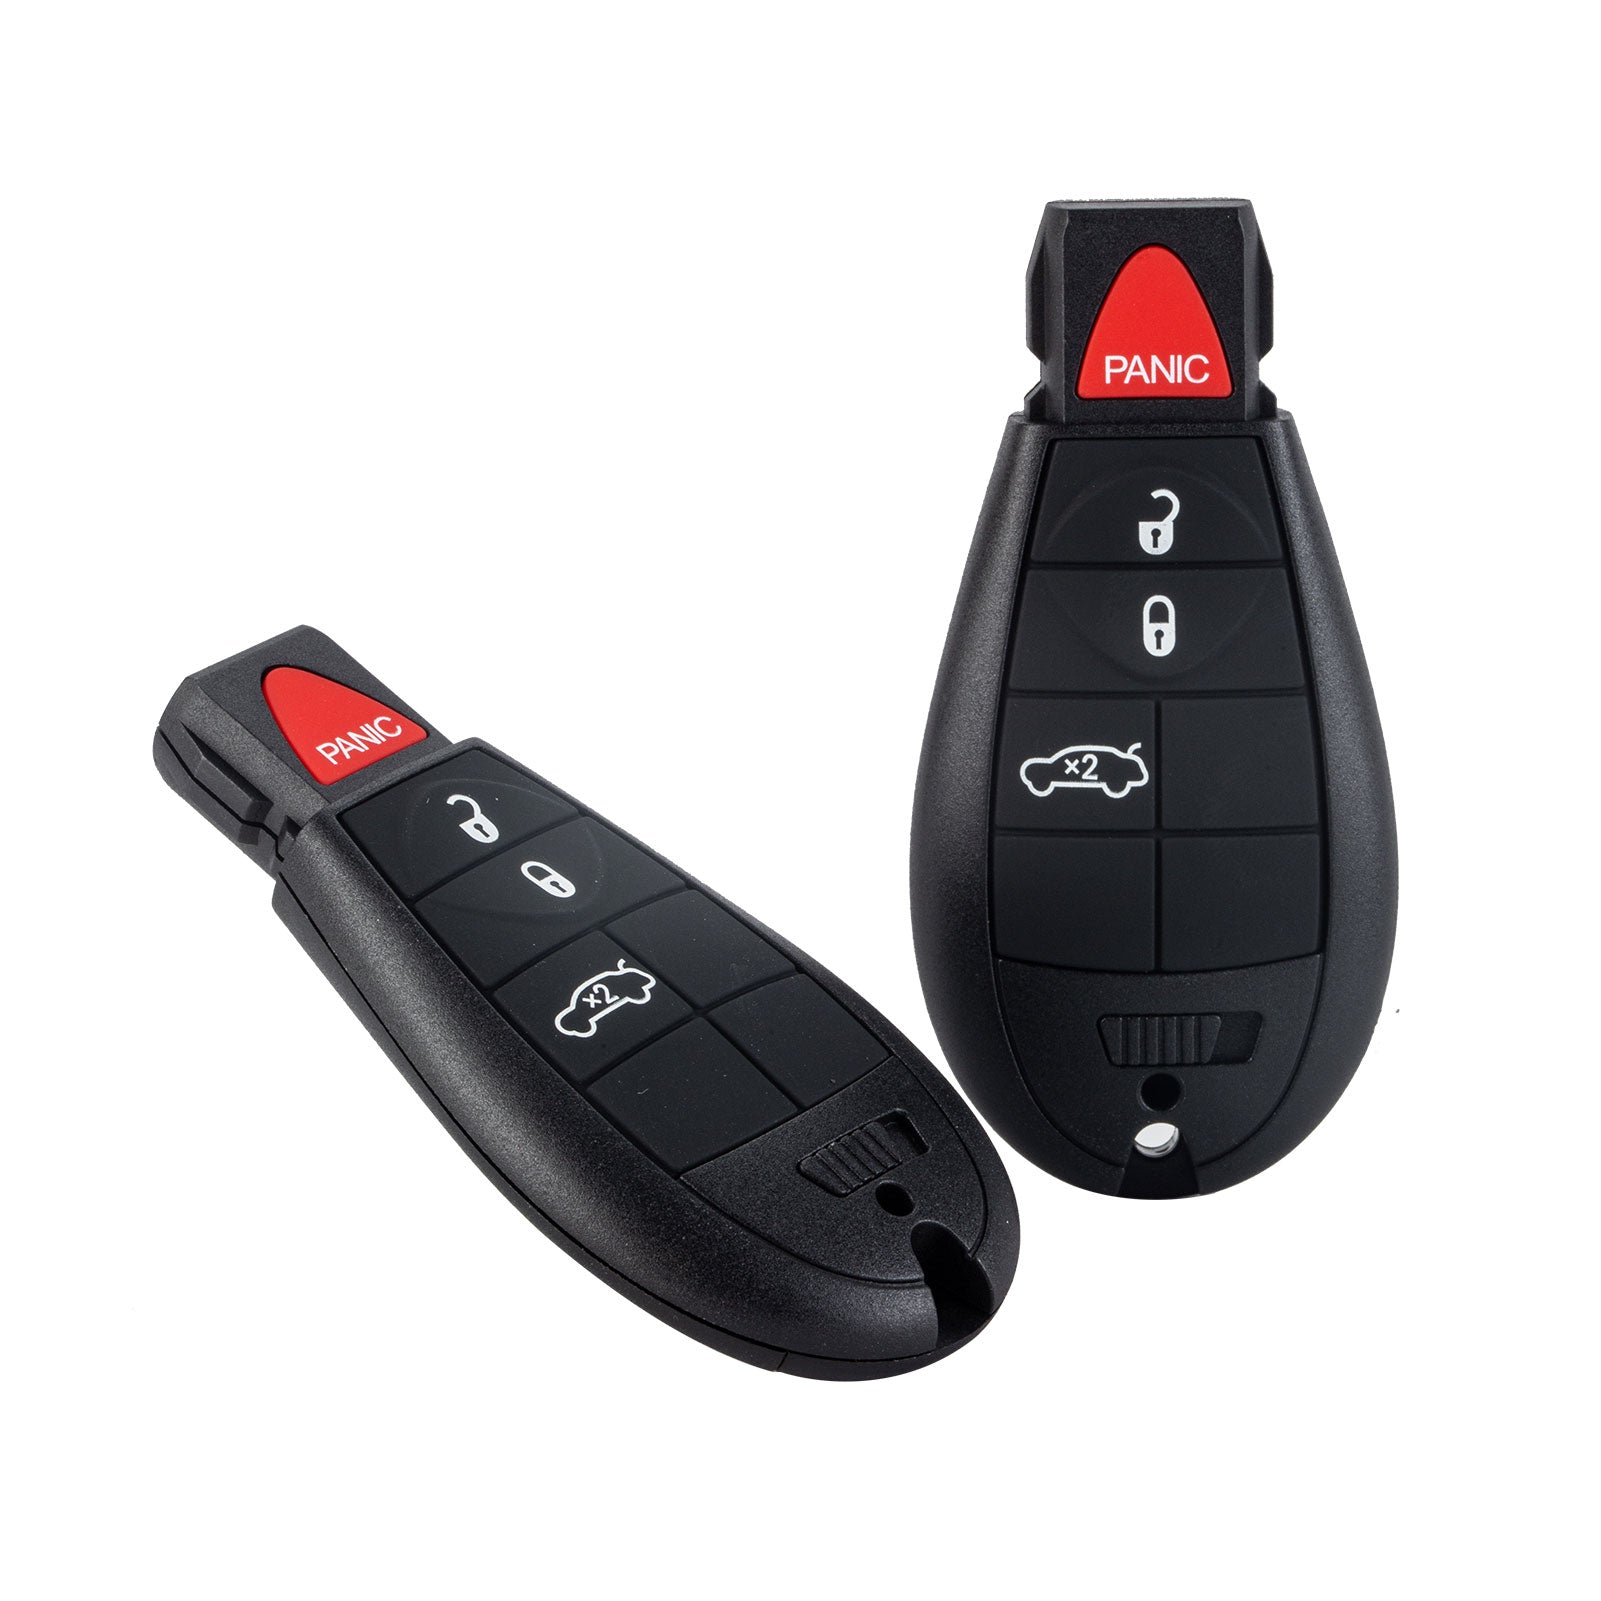 Car Key Fob Replacement for Dodge Charger Keyless Entry Control 4 Button IYZ-C01C or M3N5WY783X  KR-D4RA